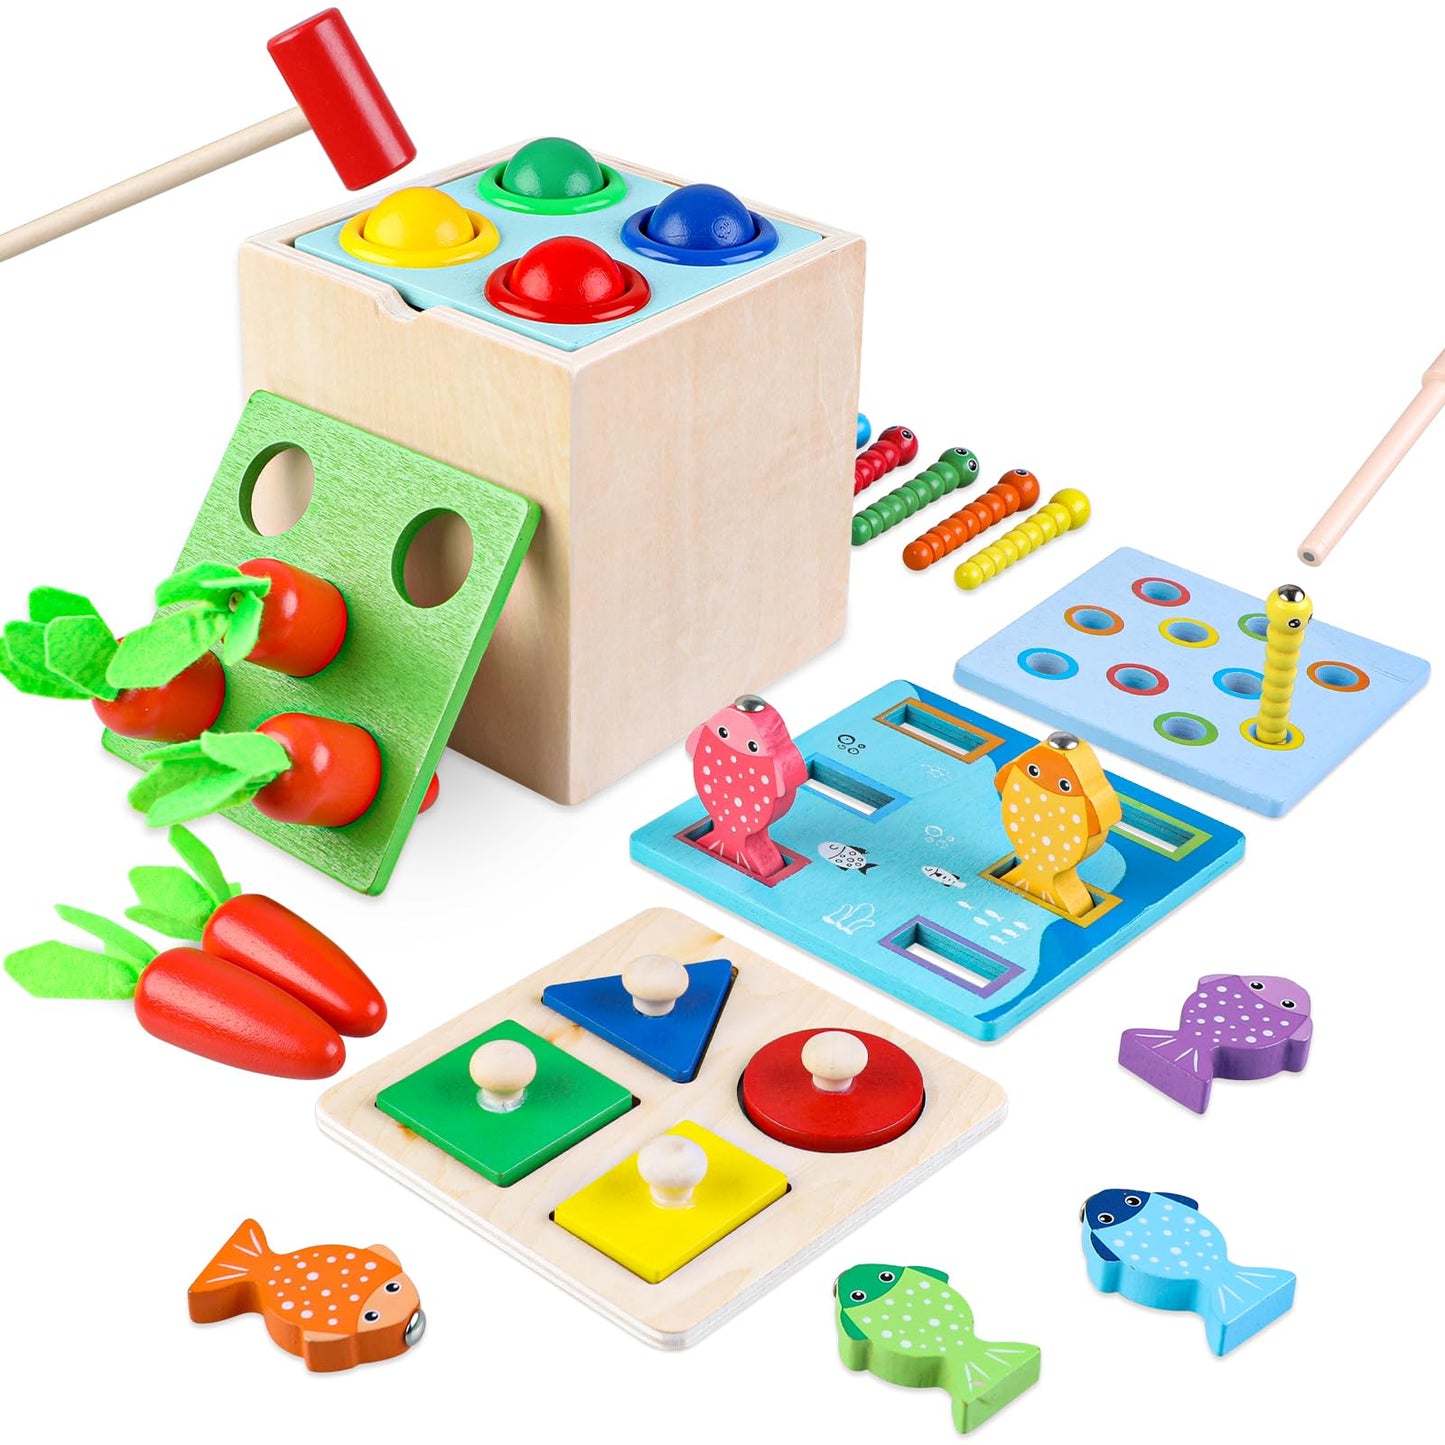 RONSTONE Montessori Toys for 1+ Years Old Kids - 5-in-1 Wooden Play Kit Wood Preschool Fine Motor Skills - Carrot Harvest Game Educational Toys - Christmas Birthday Gift for Toddlers Age 12+ Months